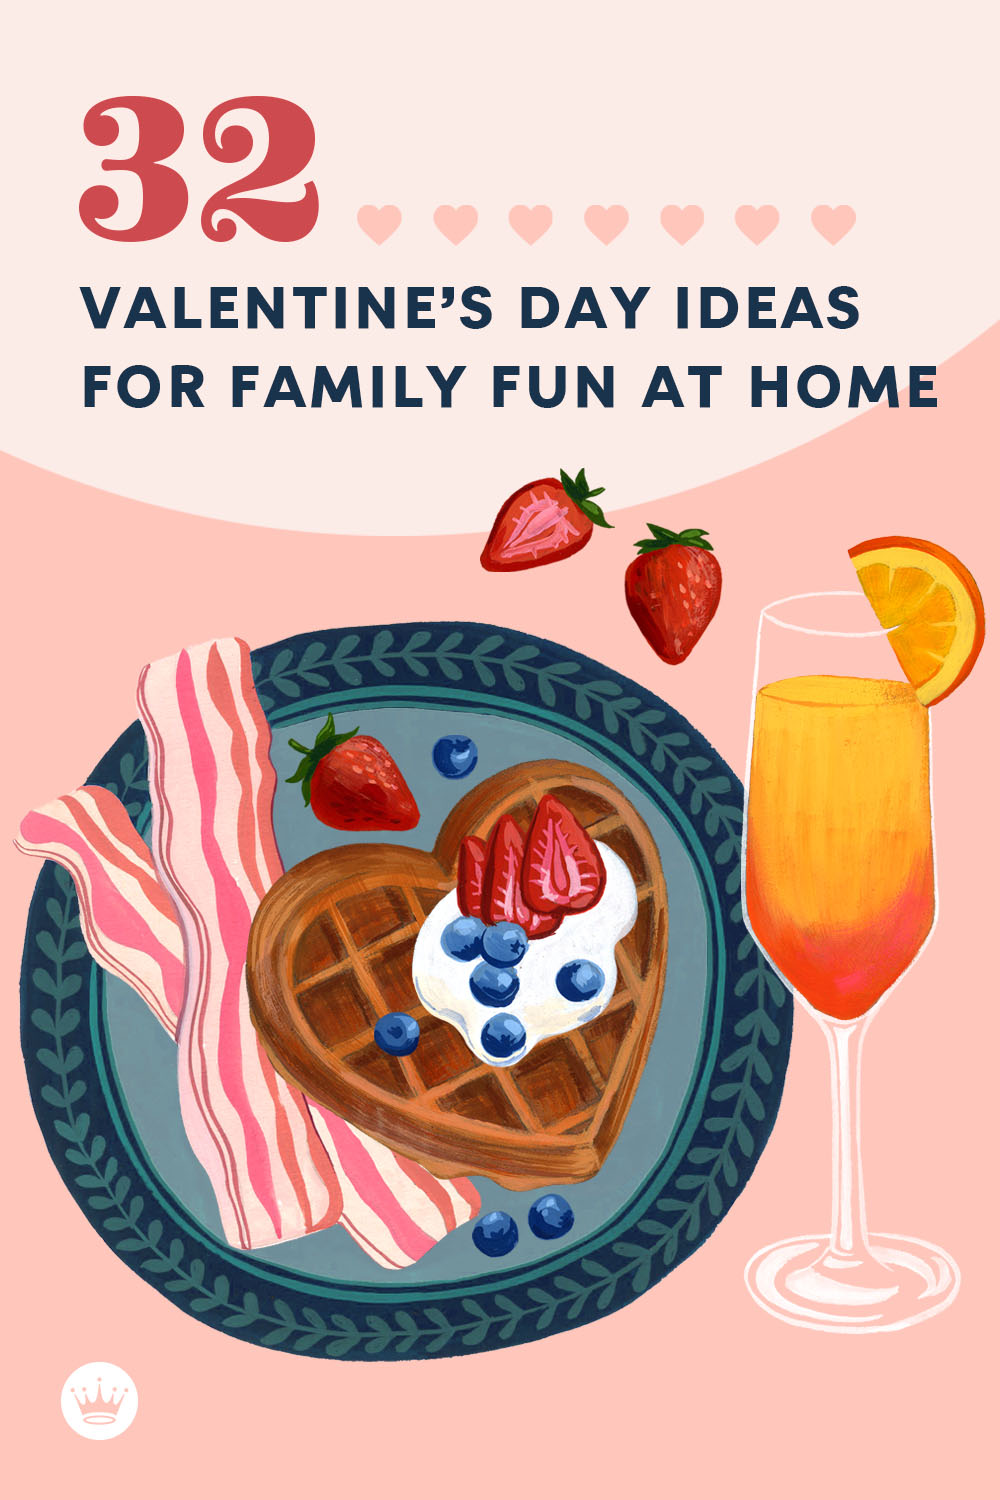 21 Sweet Valentine's Day Ideas for Family Fun at Home   Hallmark ...